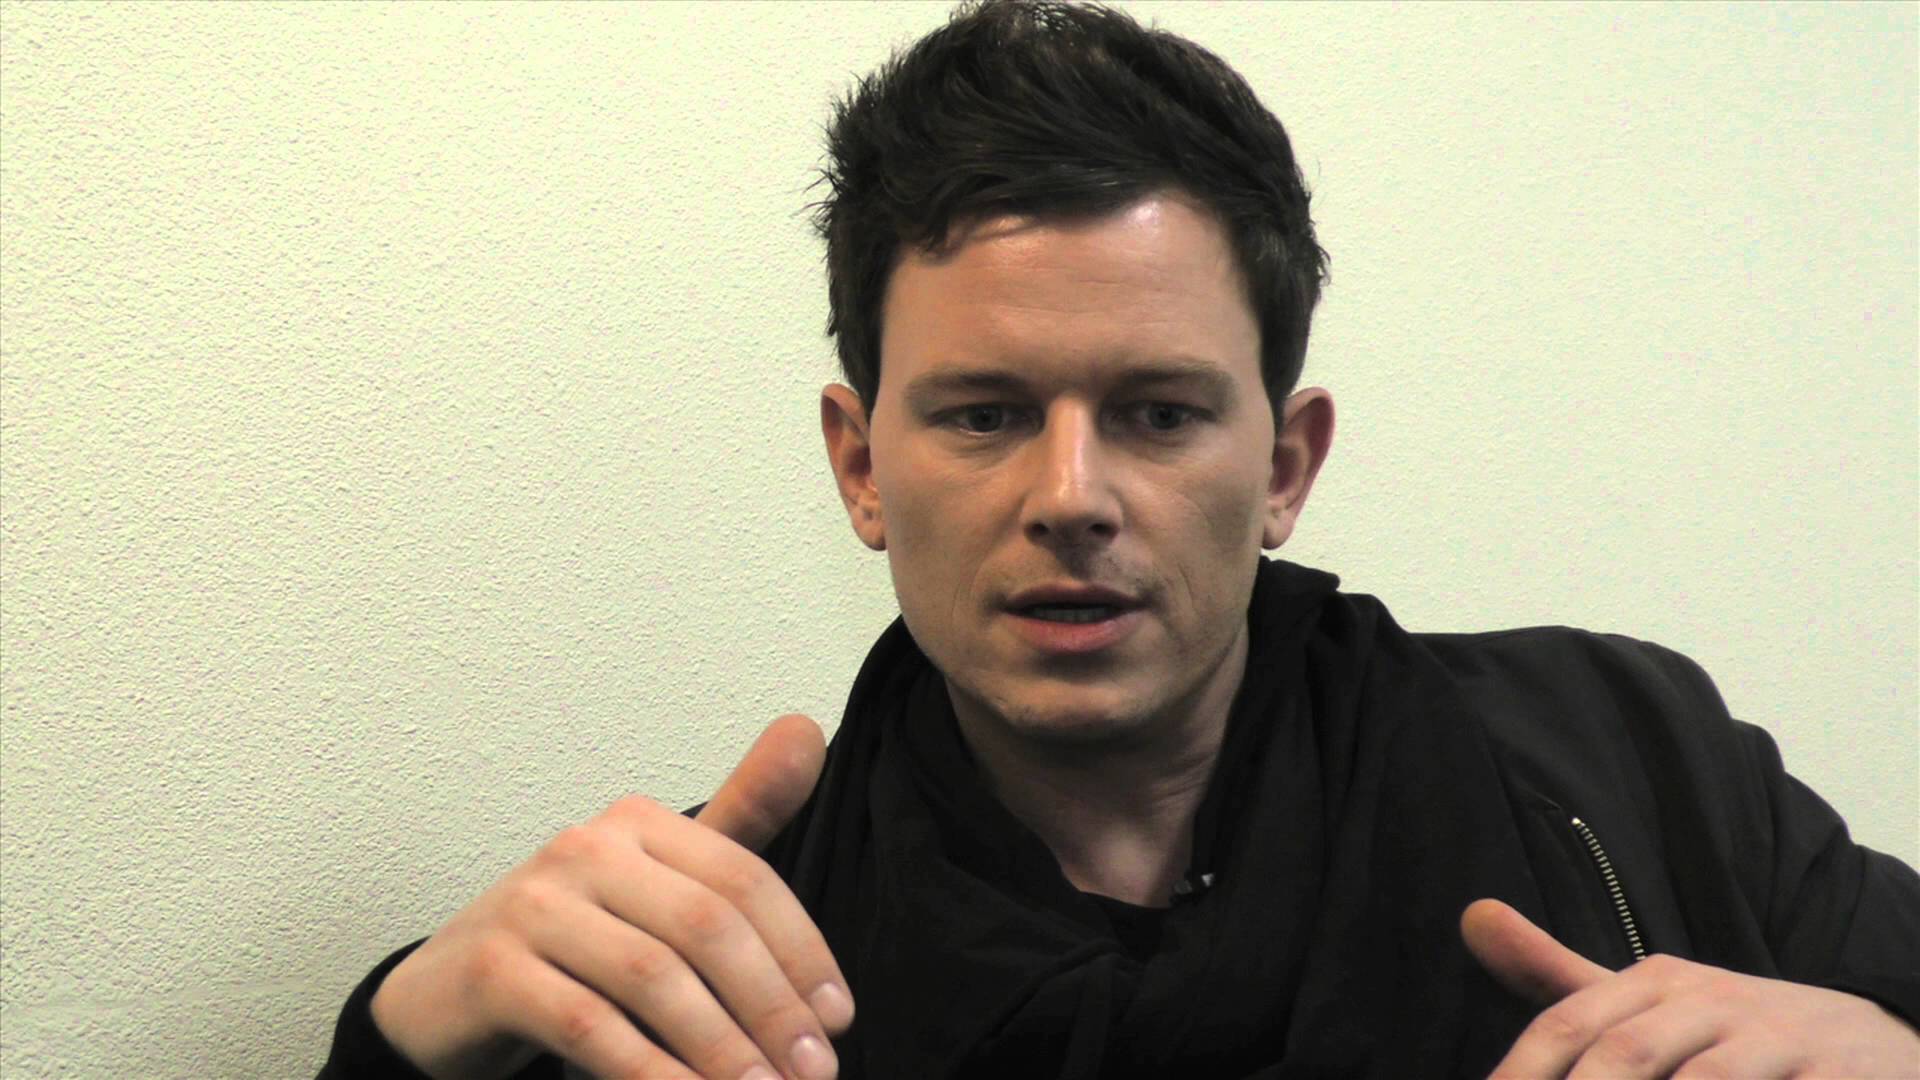 Fedde Le Grand Pics, Music Collection